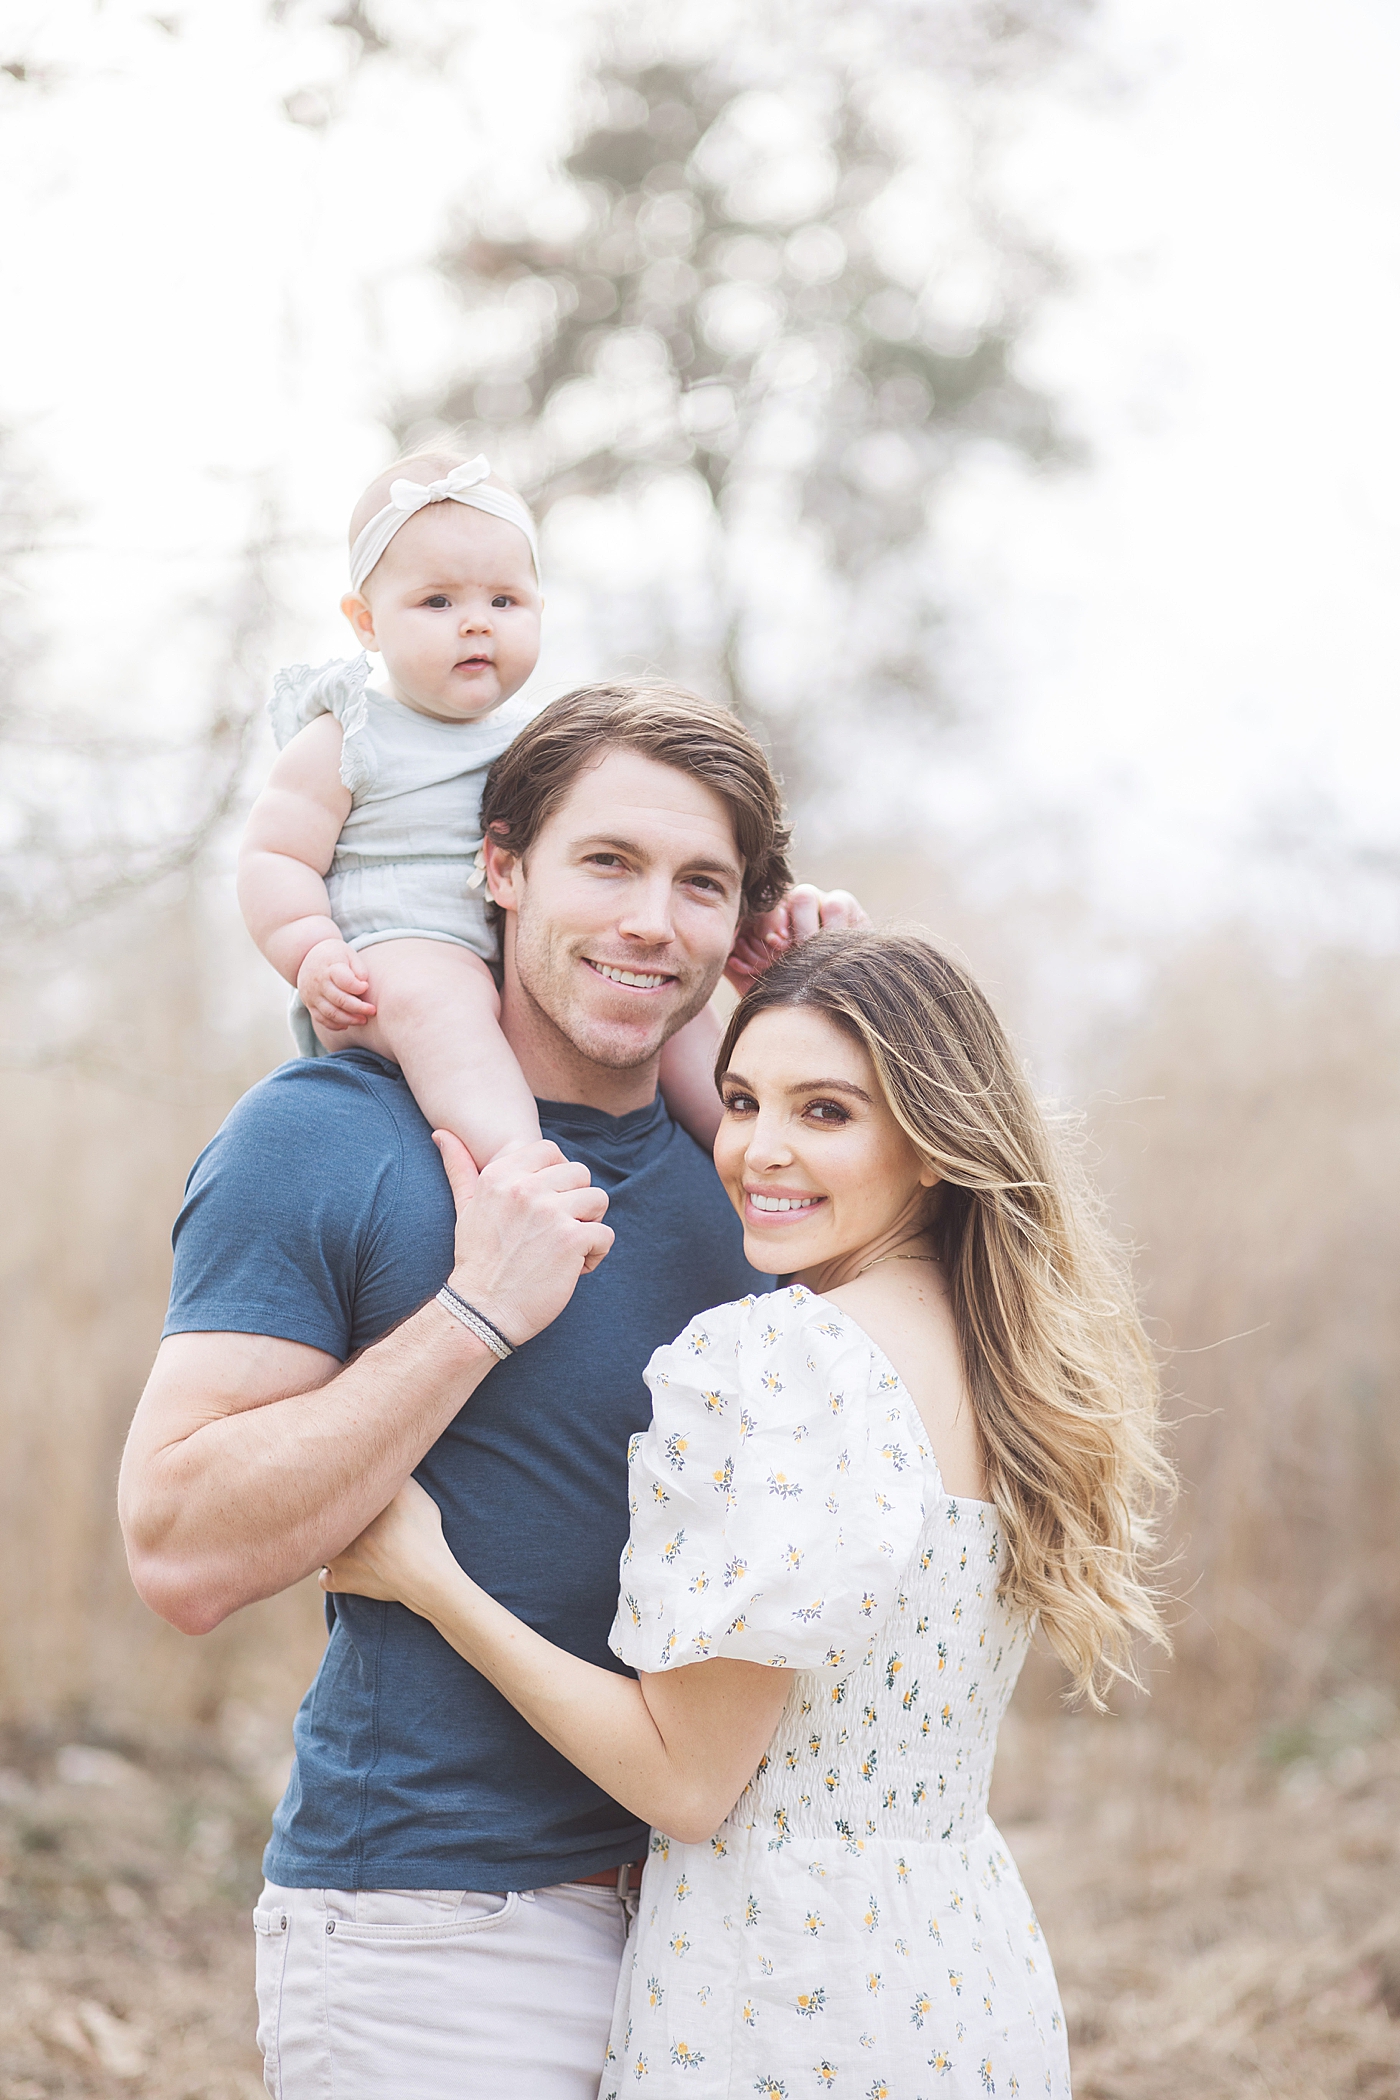 Outdoor family session with six month old baby girl. Photo by Fresh Light Photography